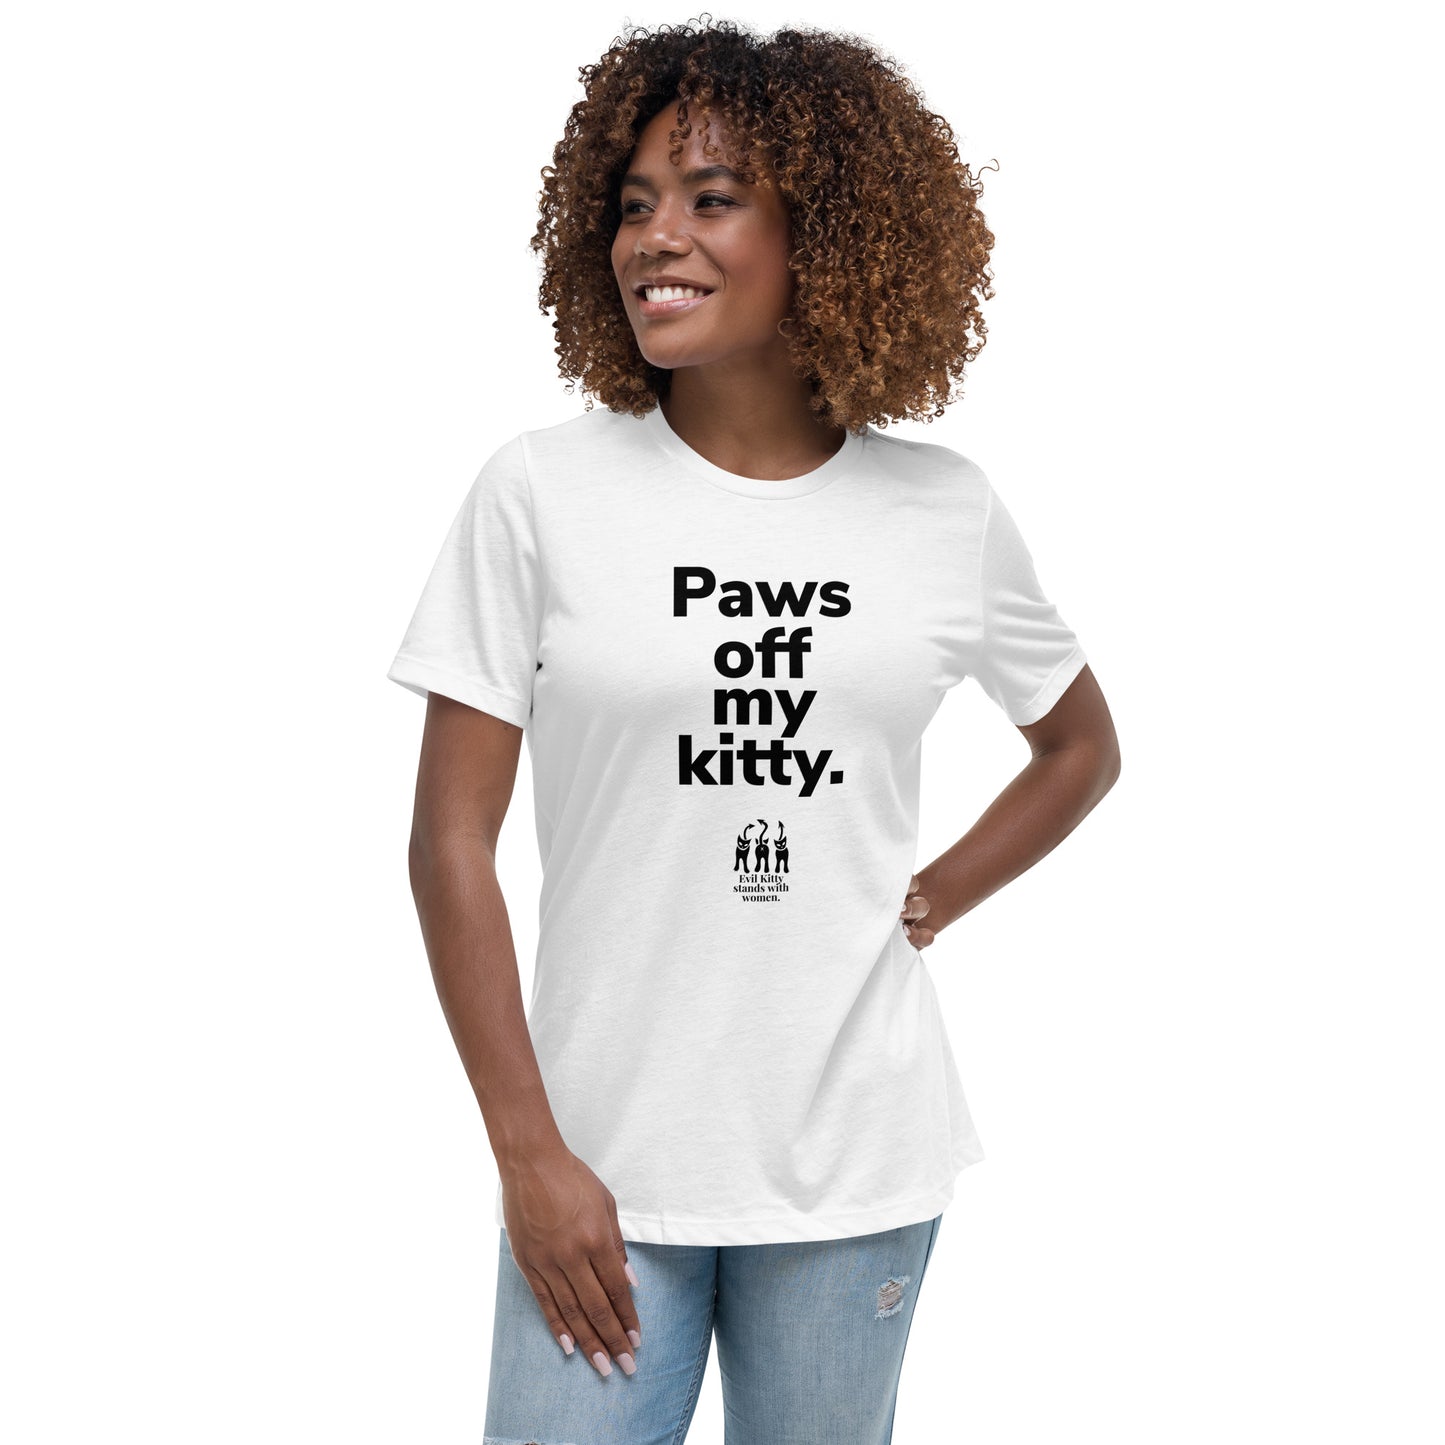 "Paws Off My Kitty" T-Shirt